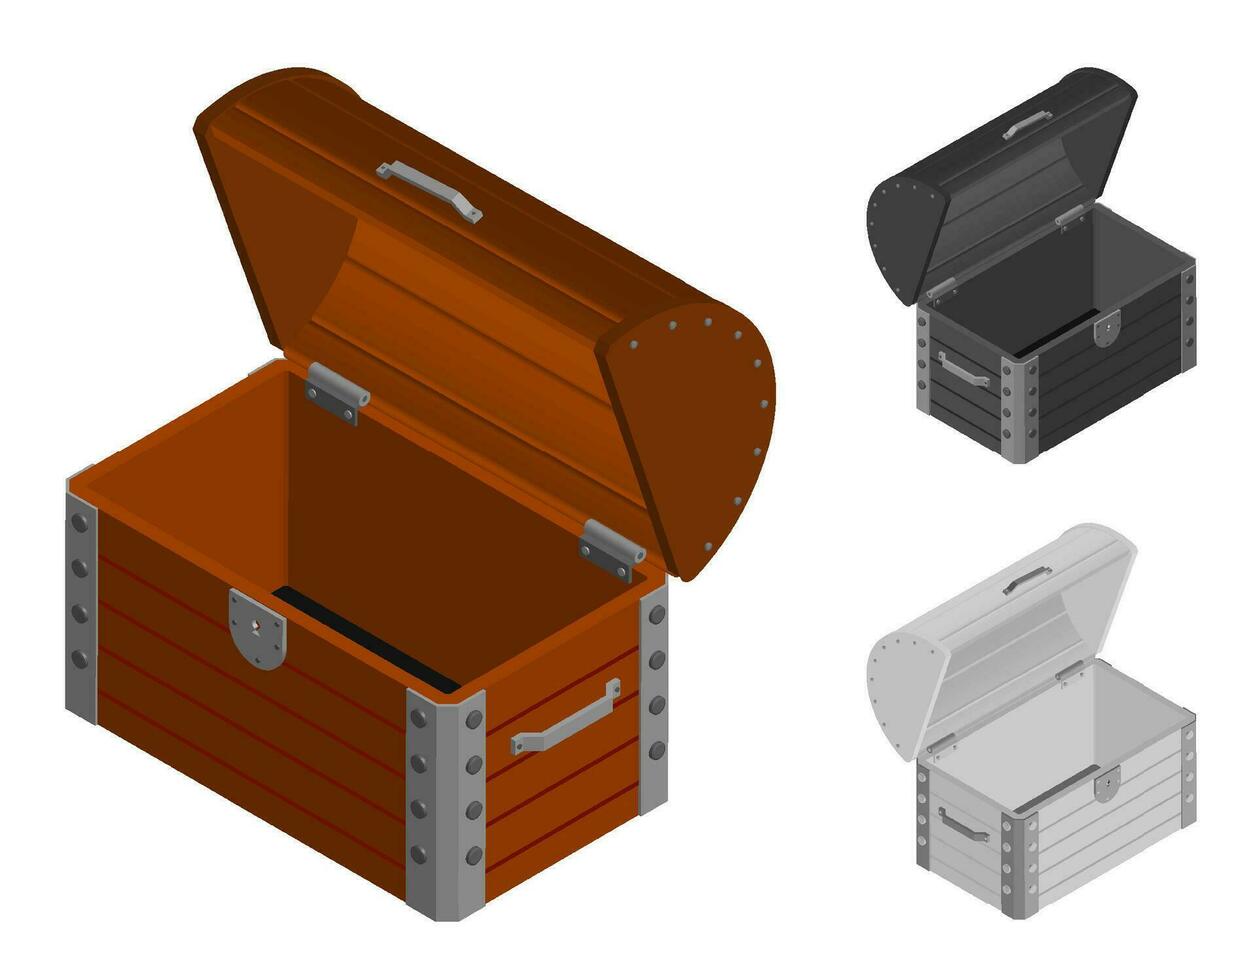 empty wooden chest with open lid. Failure to find pirate treasures. Isometric 3D vector